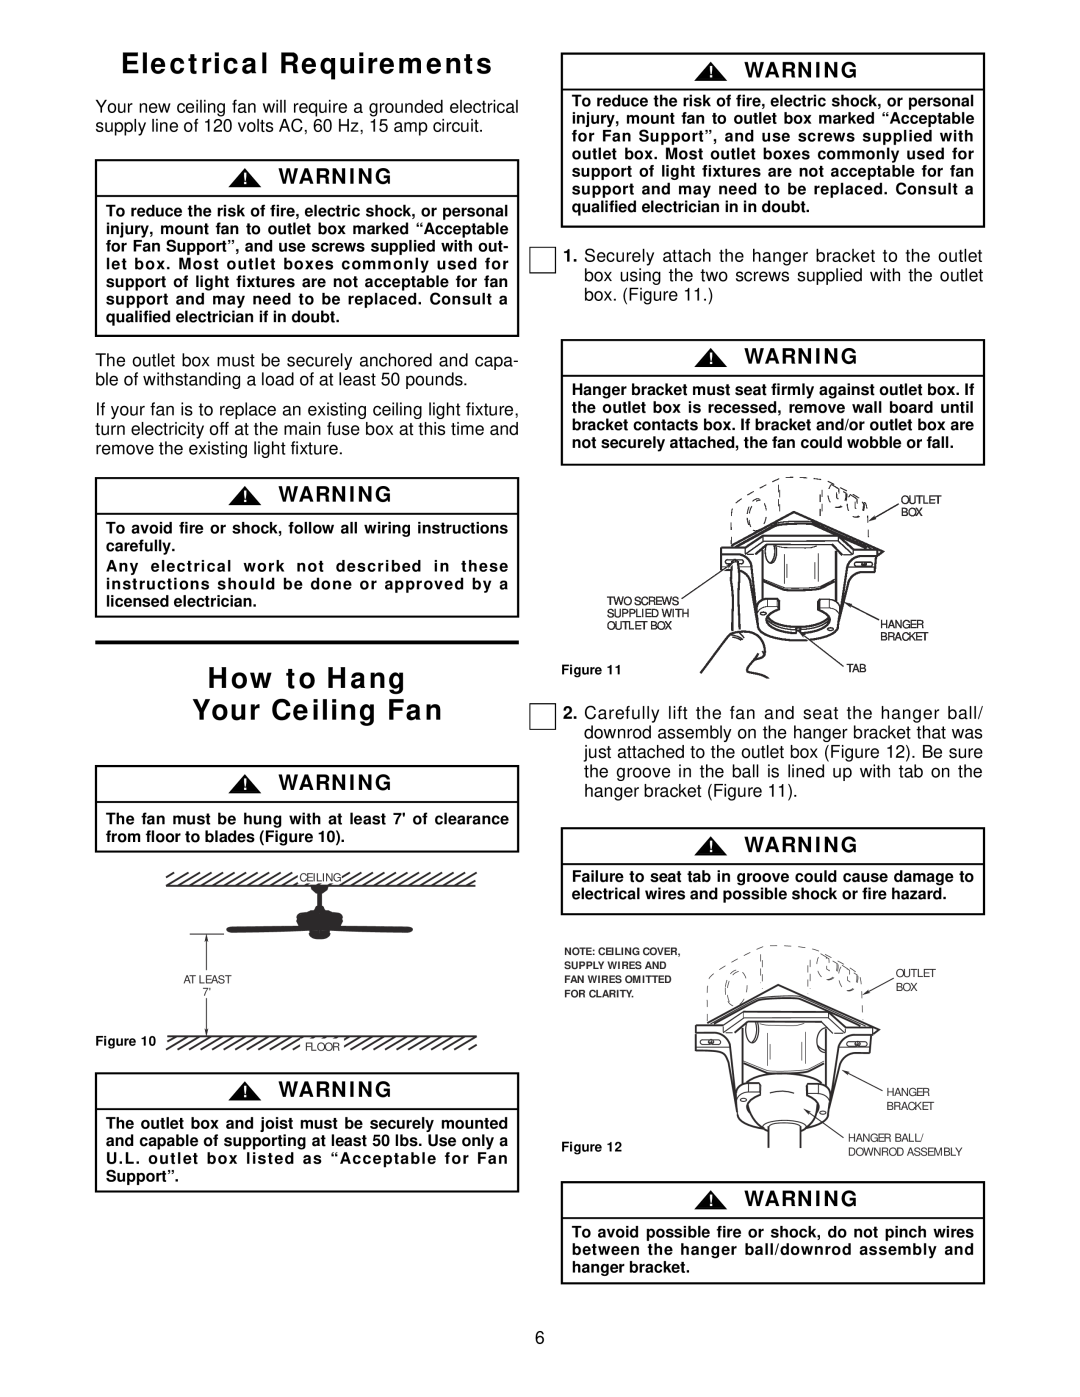 Emerson CF690CK00, CF690ORB00 warranty Electrical Requirements, How to Hang Your Ceiling Fan 